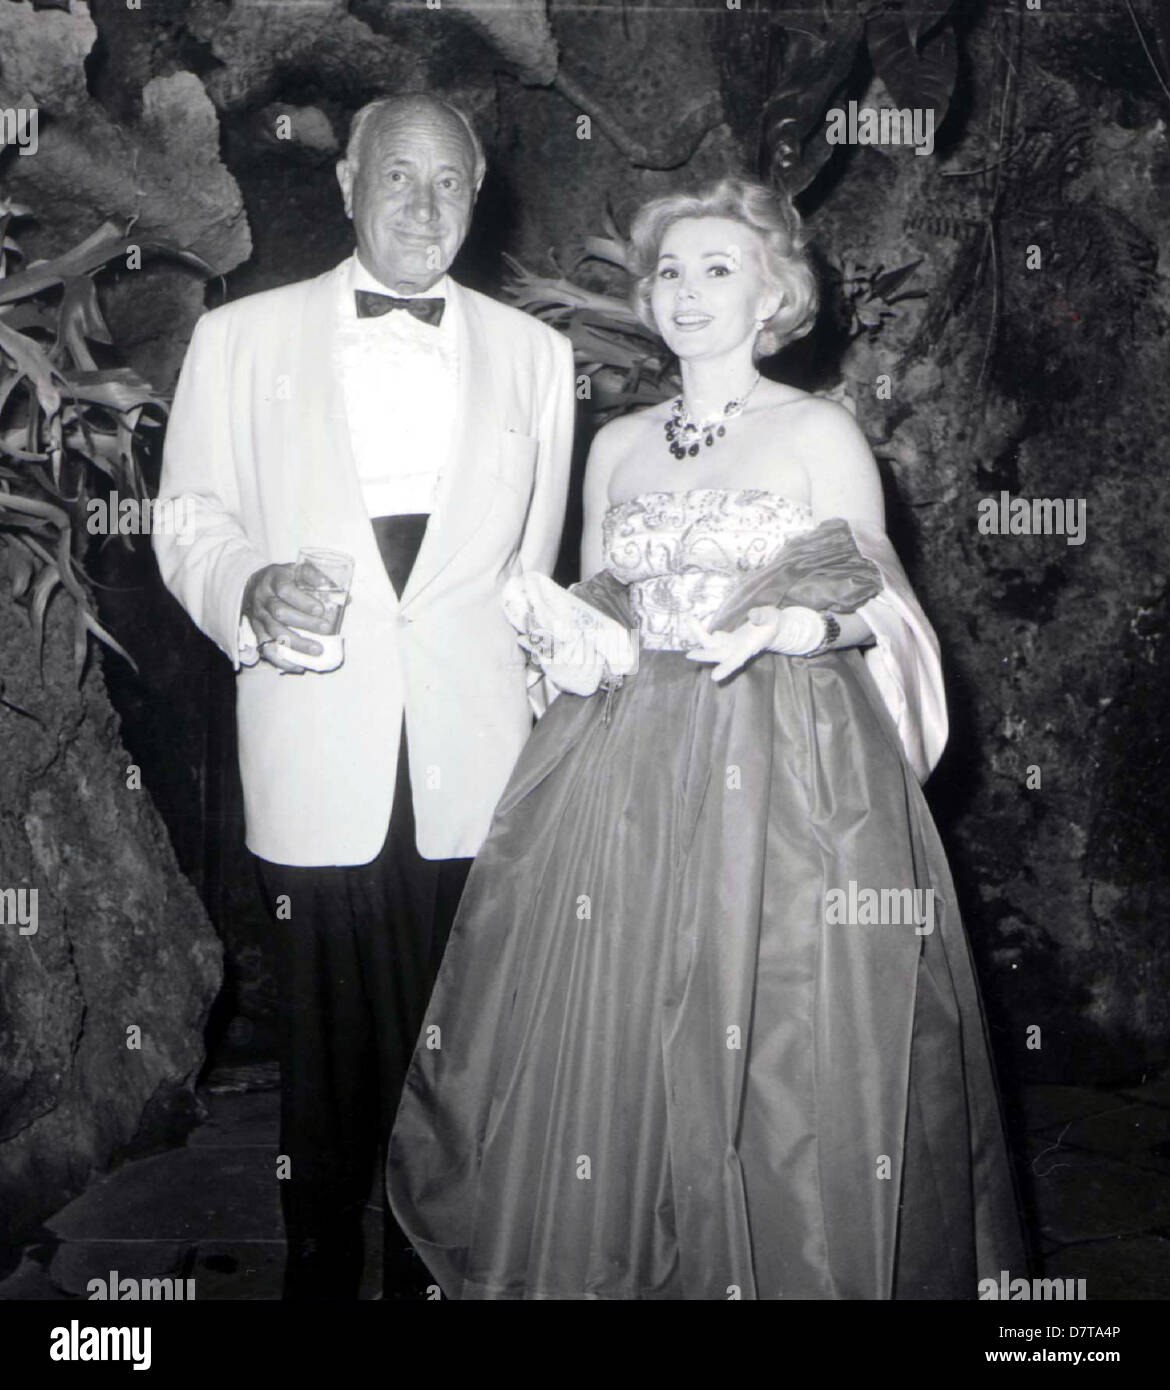 May 13, 2013 - New York, New York, U.S. - ZSA ZSA GABOR and CONRAD HILTON  in an undated photo. No location or date provided by source. (Credit Image:  © Globe Photos/ZUMAPRESS.com